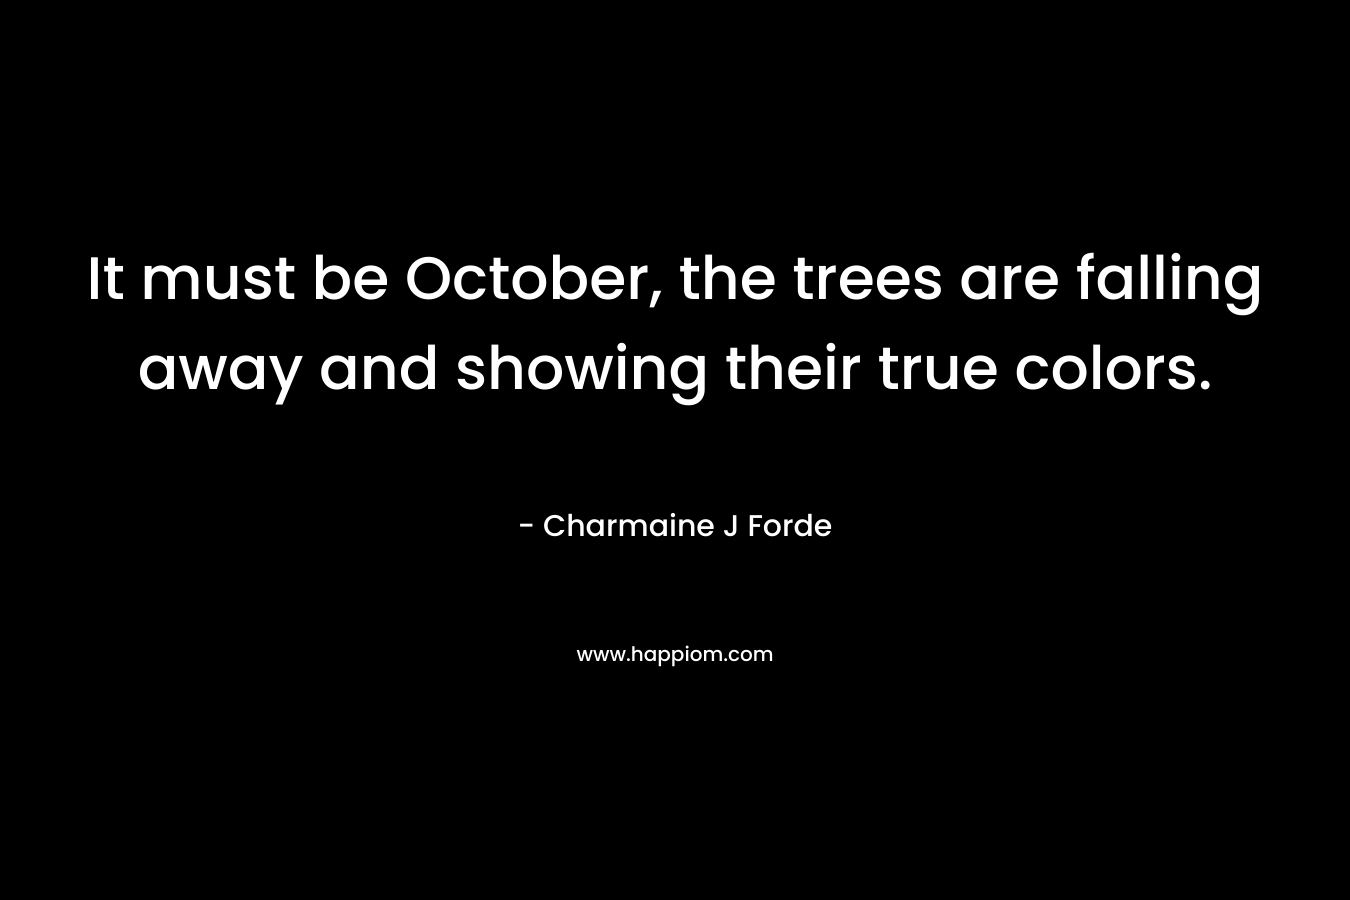 It must be October, the trees are falling away and showing their true colors. – Charmaine J Forde